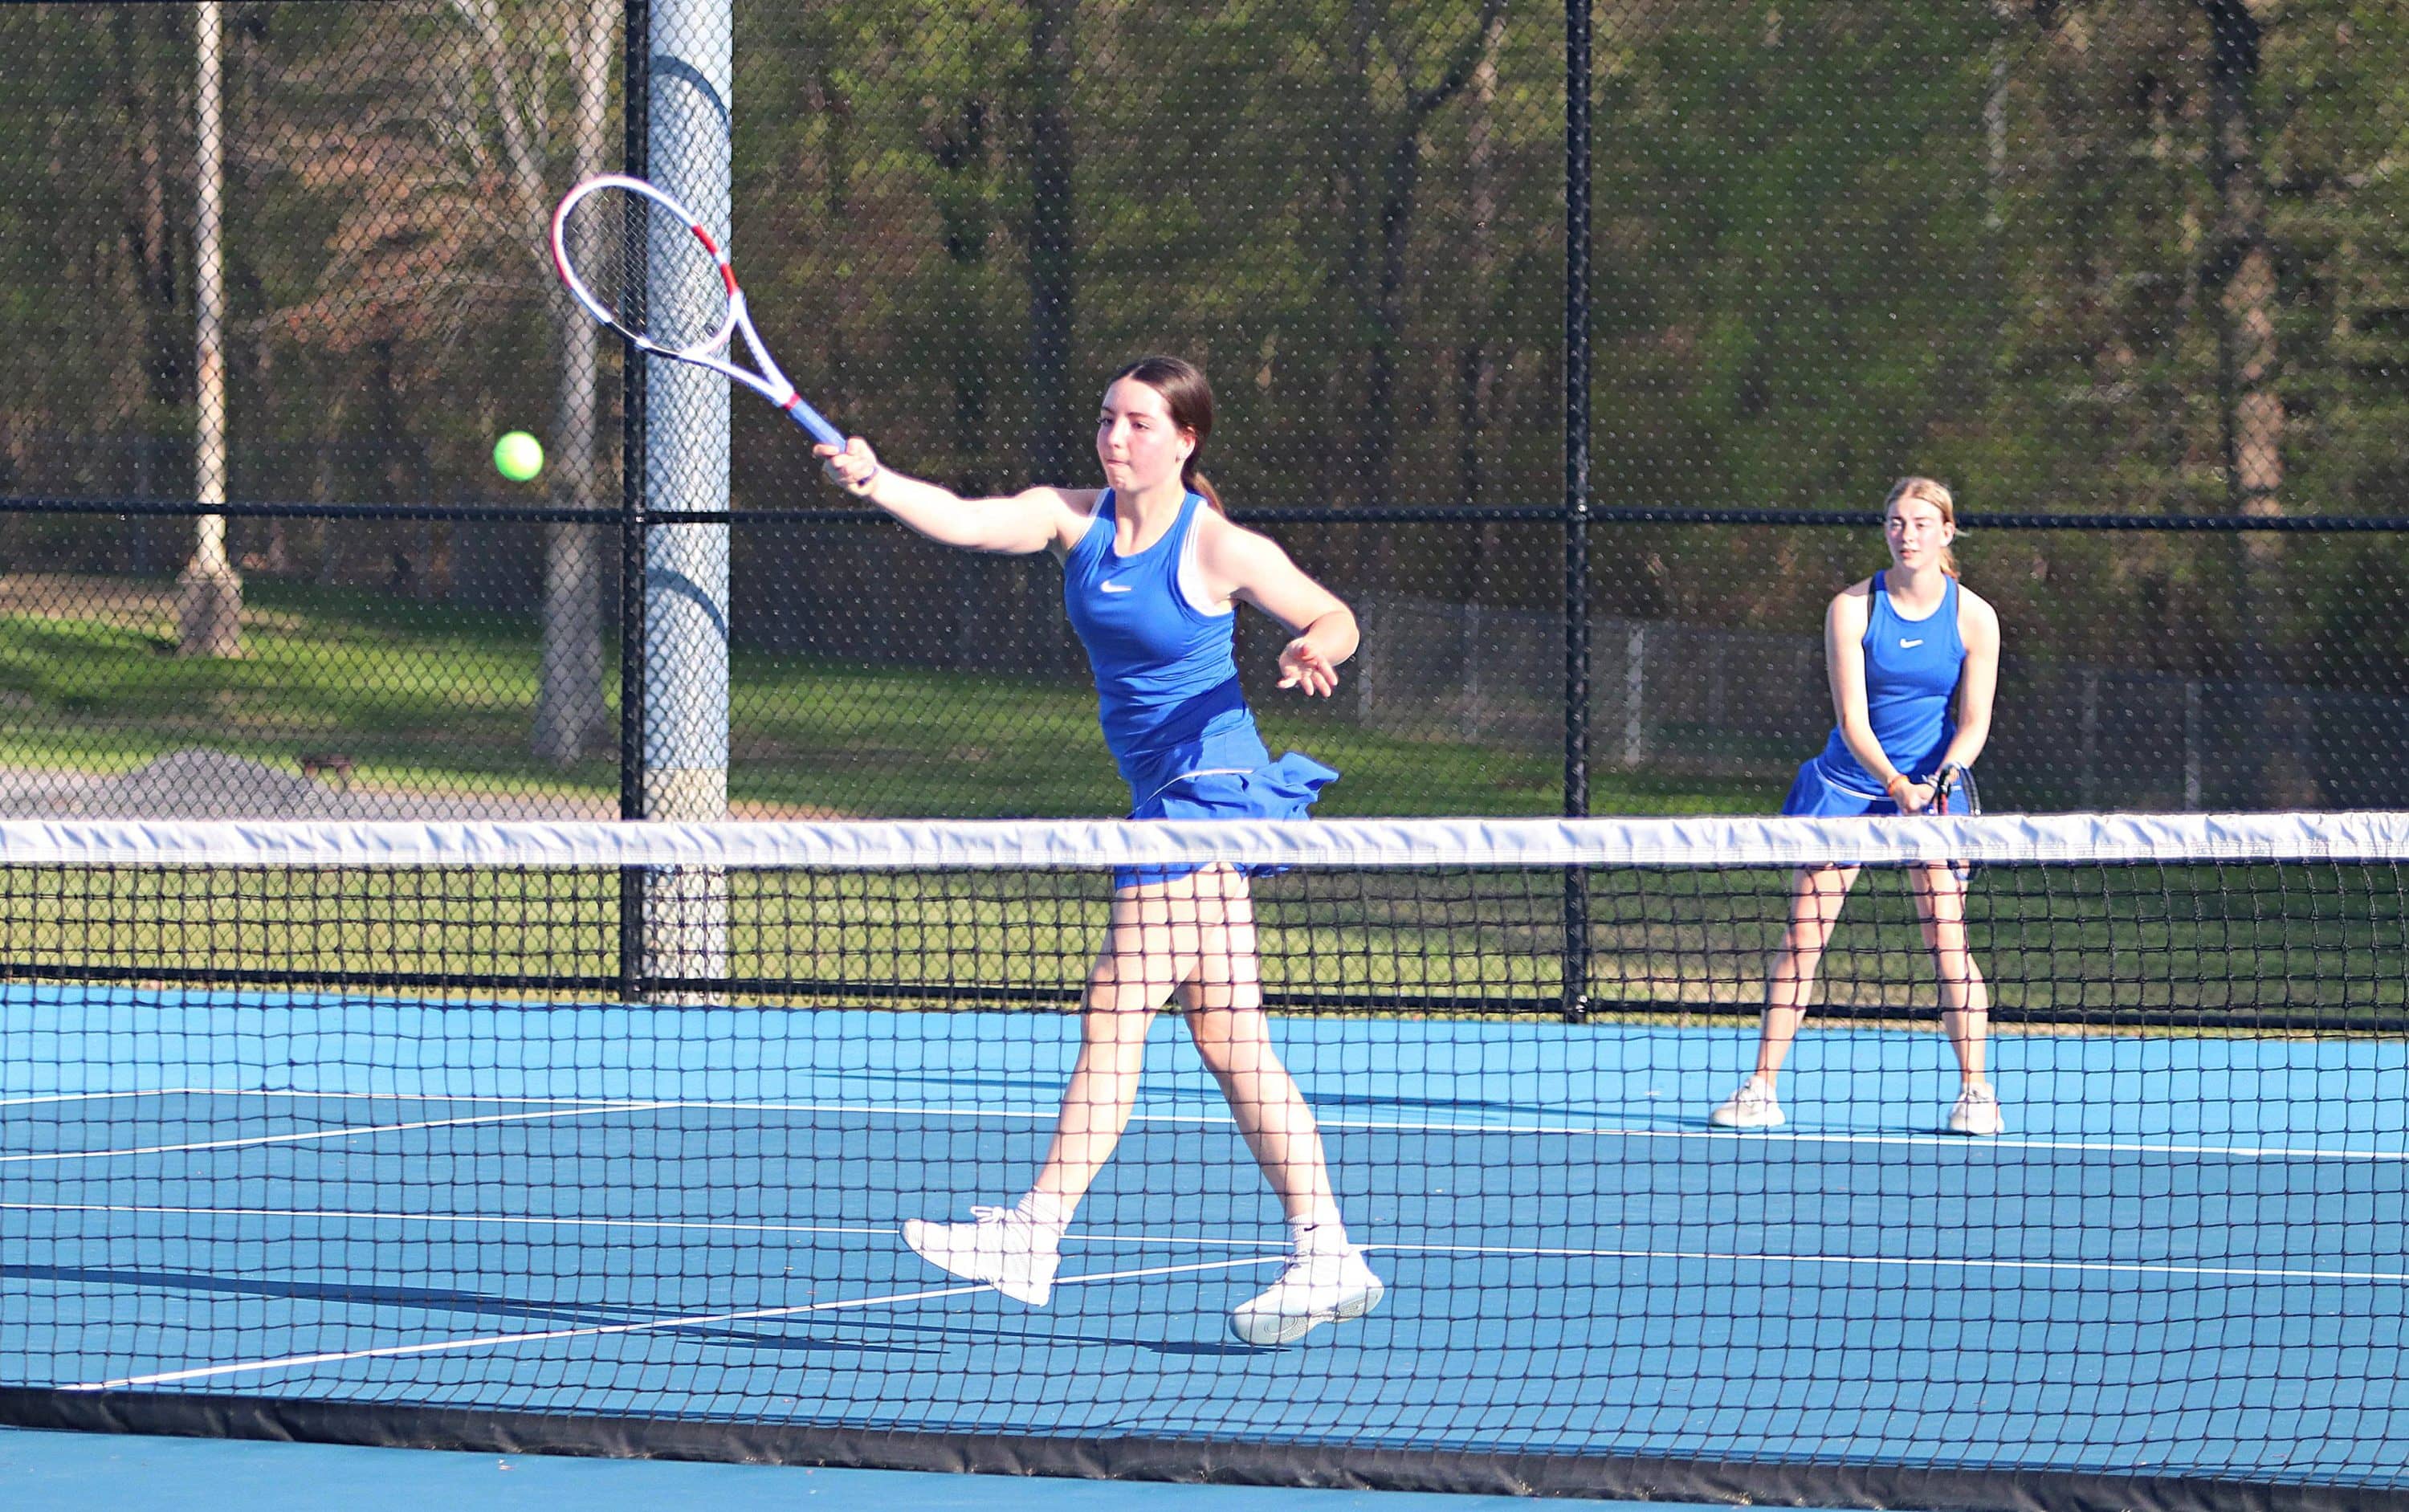 Doubles team Wells and Miller advance to state tennis tournament